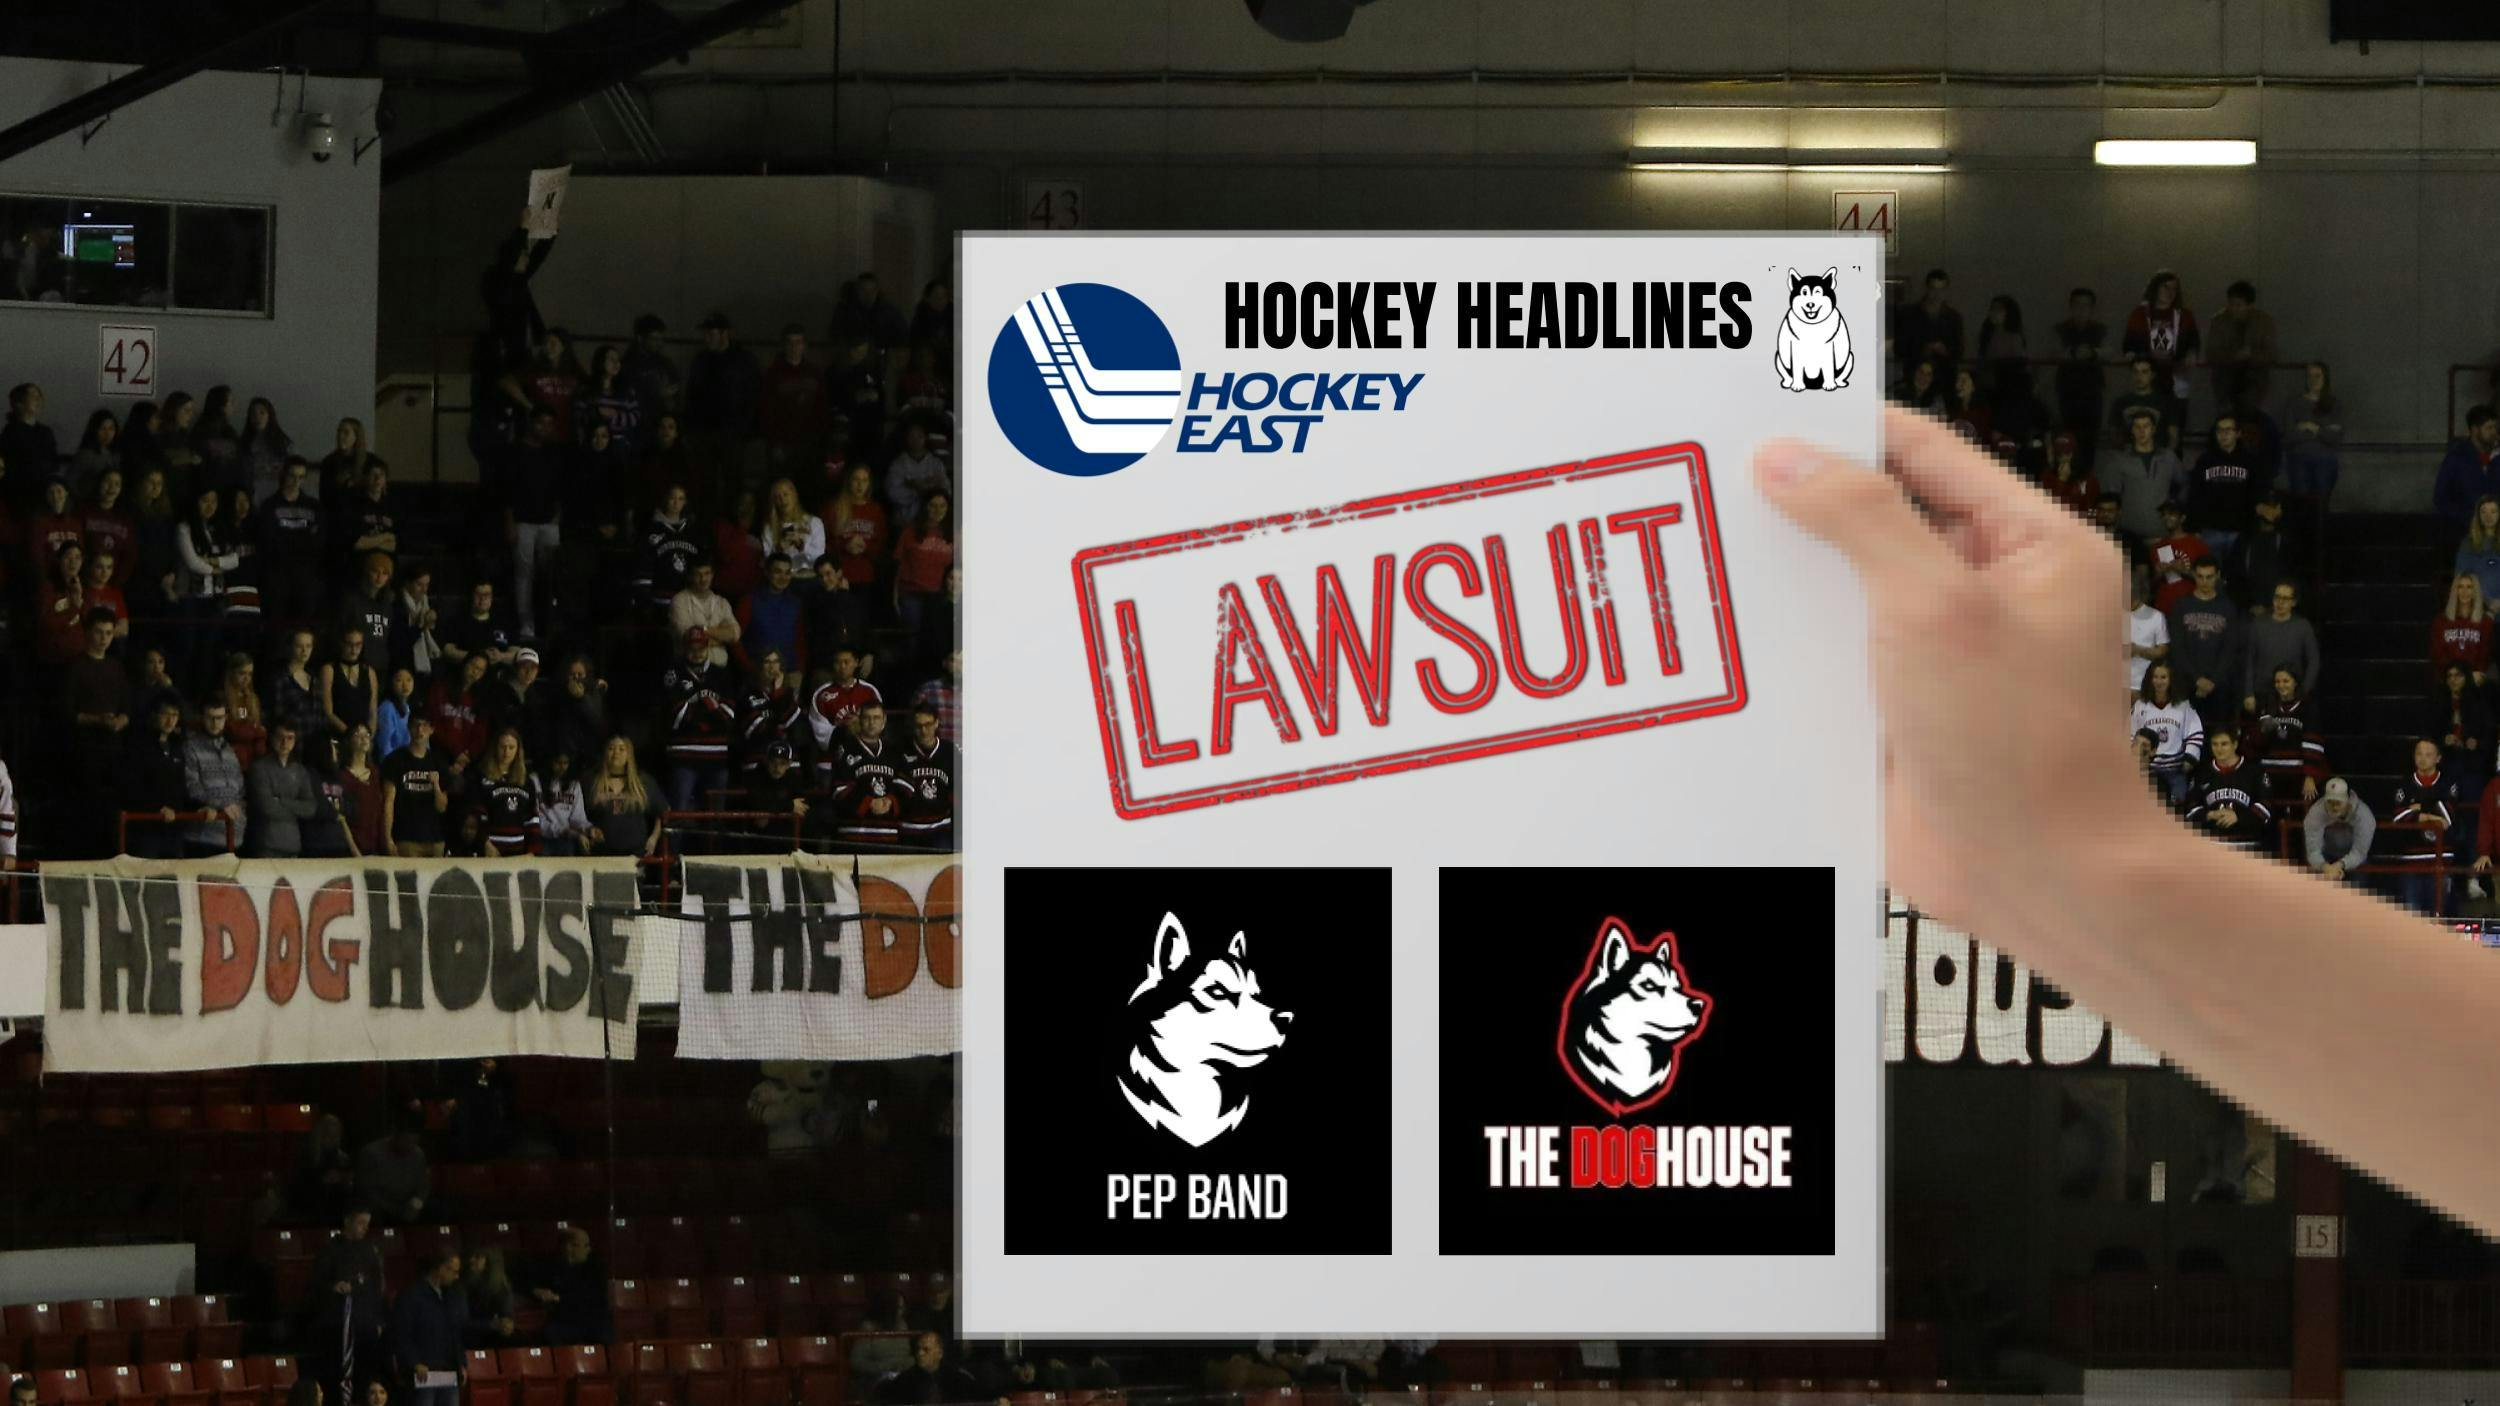 Thumbnail for DogHouse and Pep Band Sued for Emotional Damages by Hockey East: “They’re Just Too Mean”